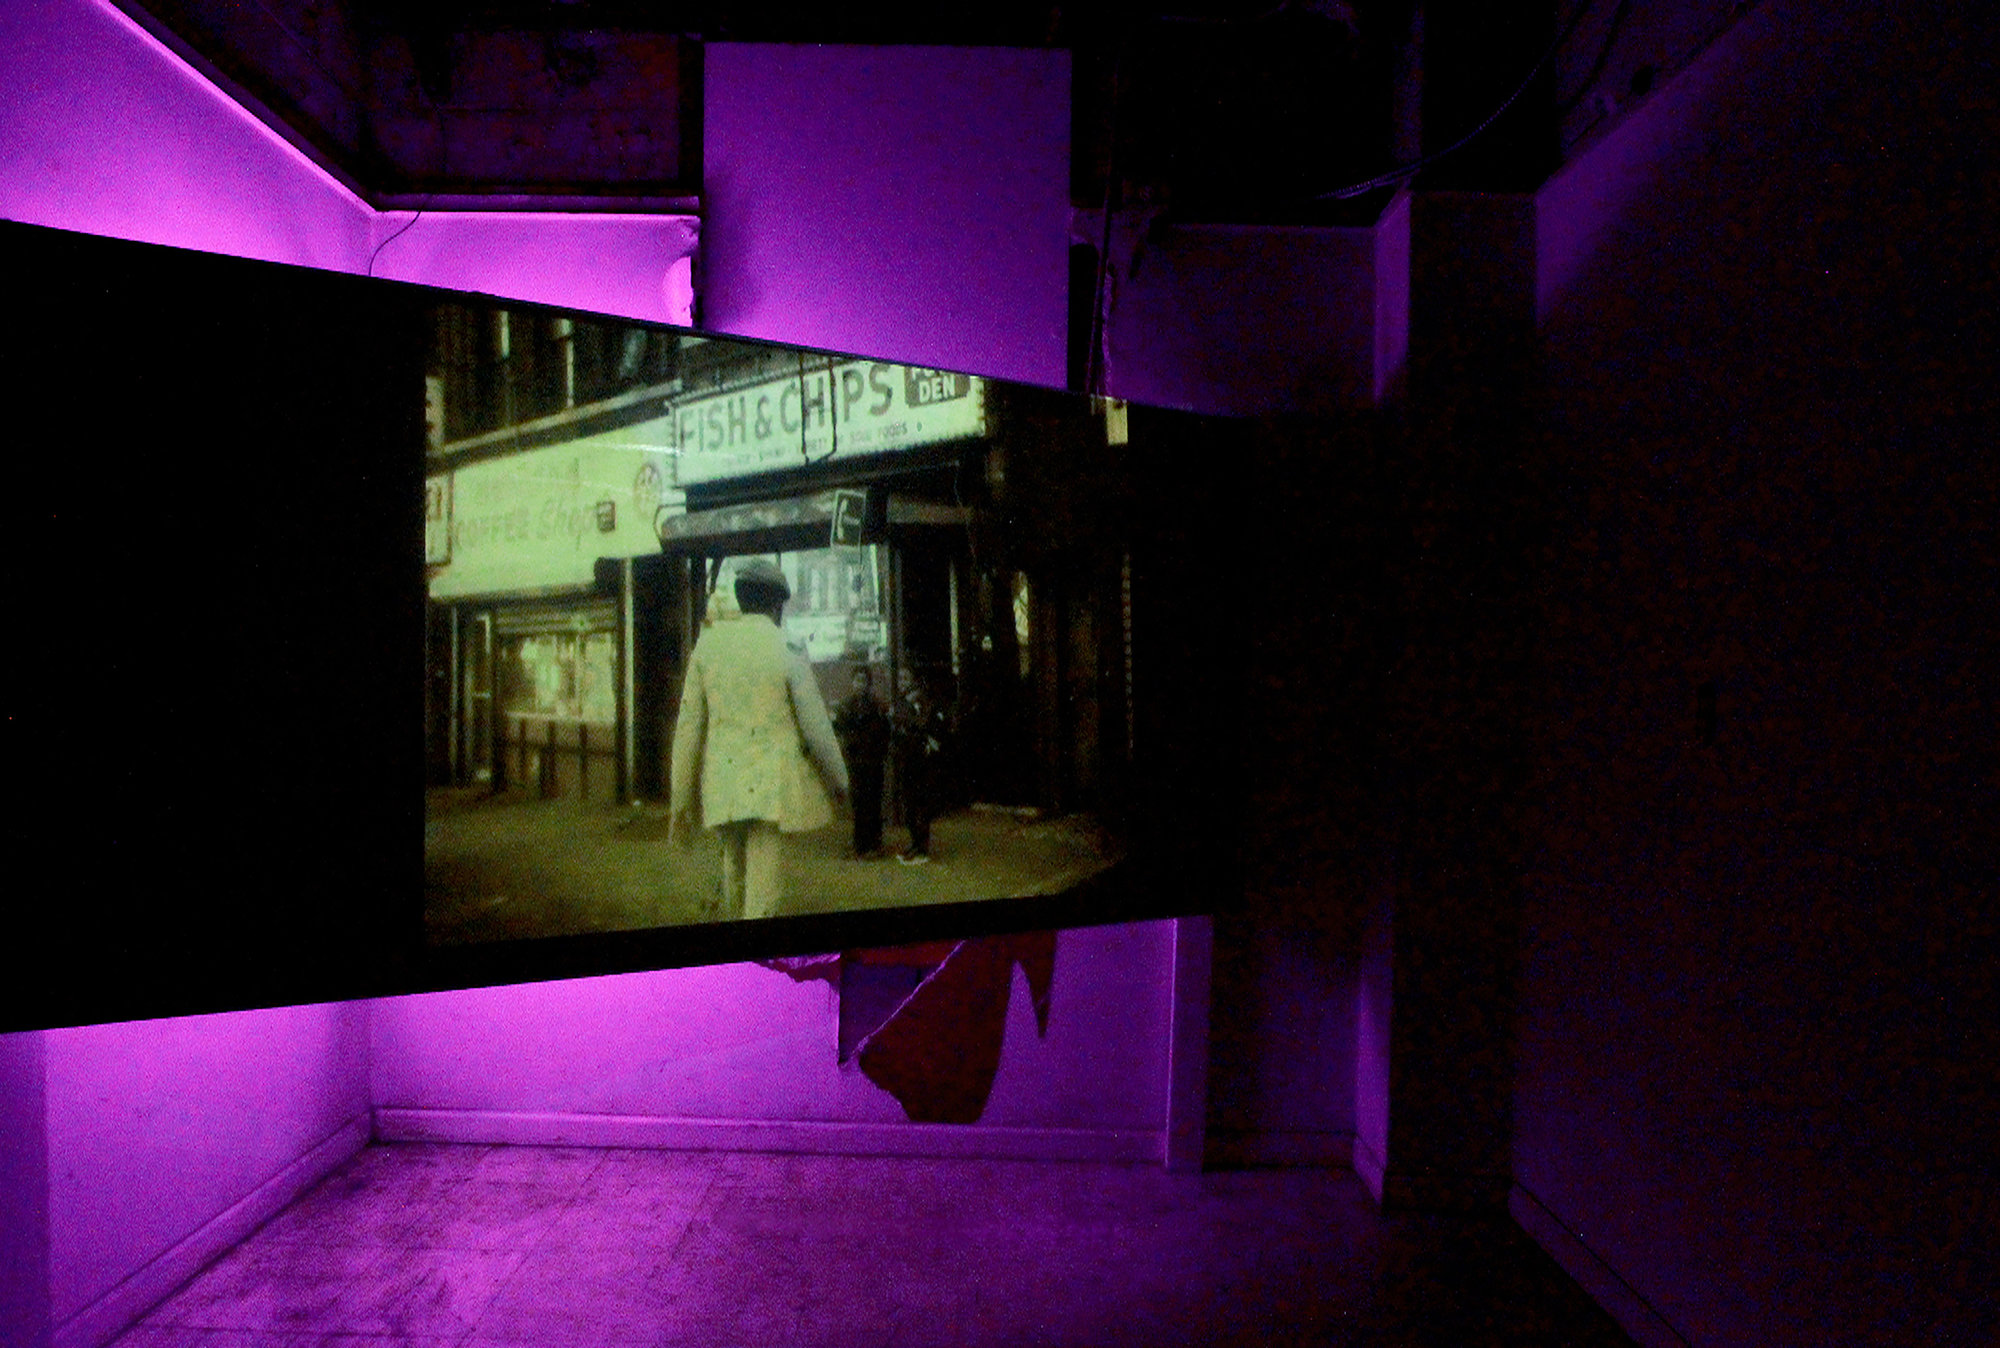 An image of a man entering a store is skewed against a neon purple and black background